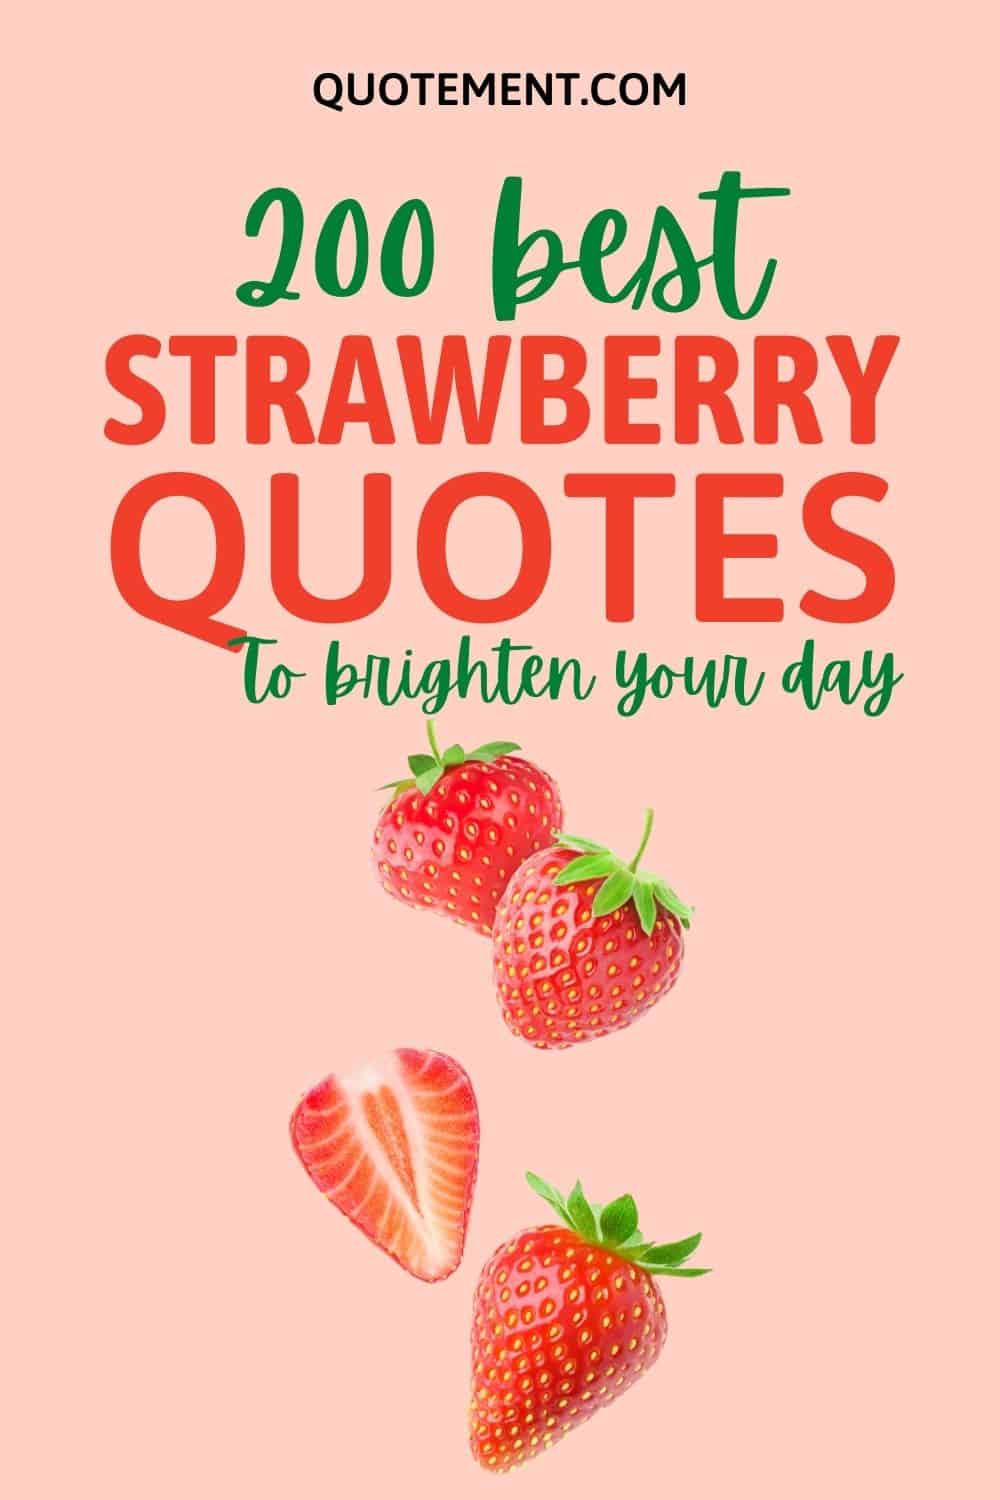 Top 200 Sweetest Strawberry Quotes To Brighten Your Day